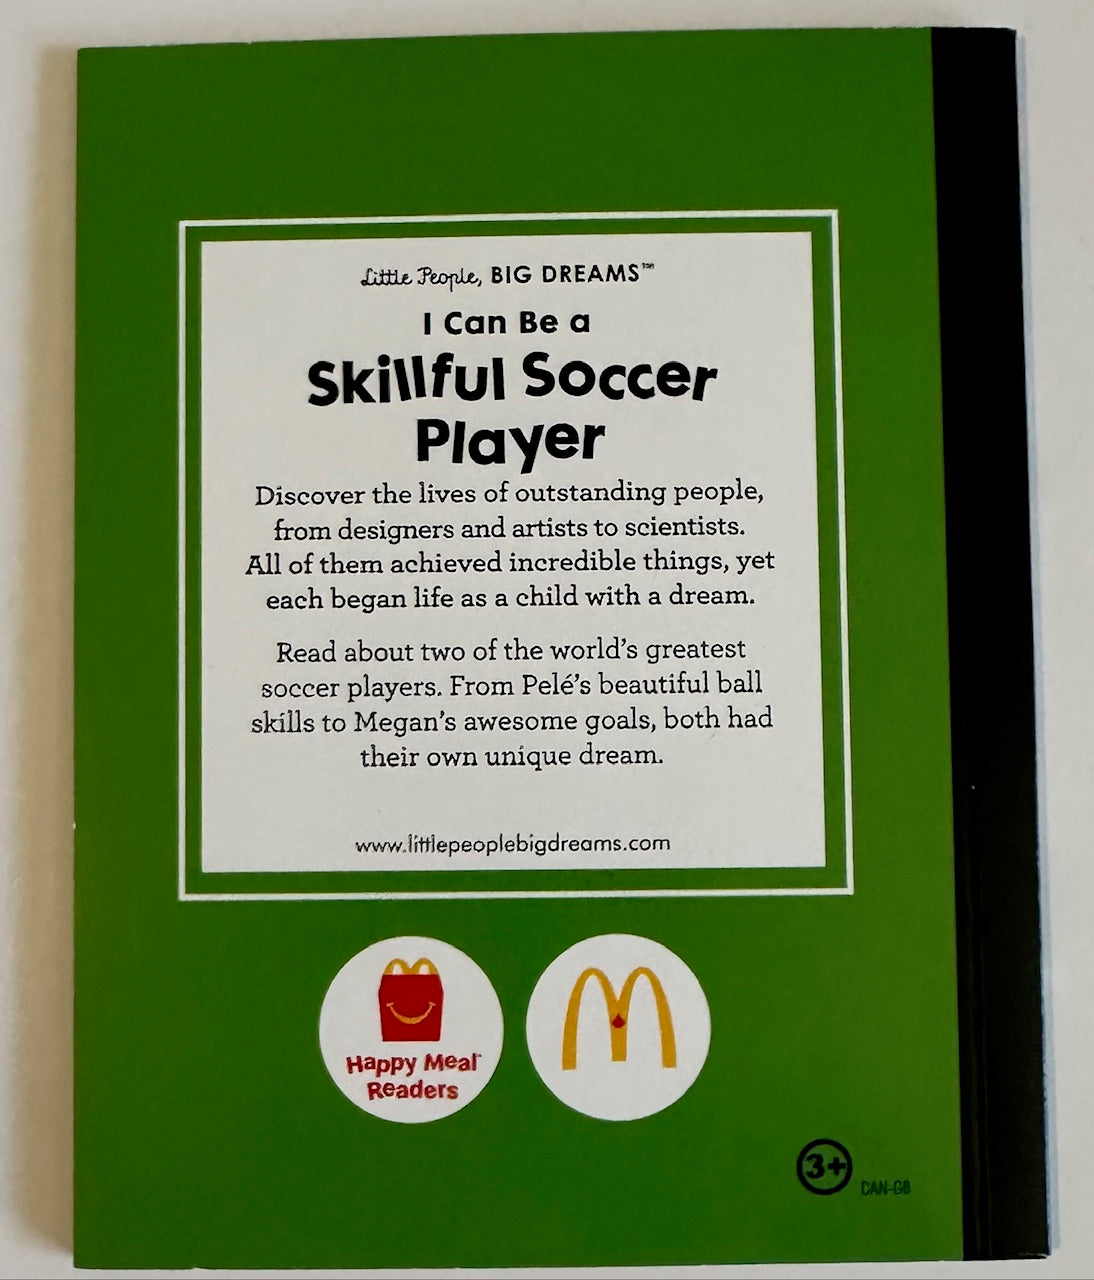 "I Can Be a Skillful Soccer Player"